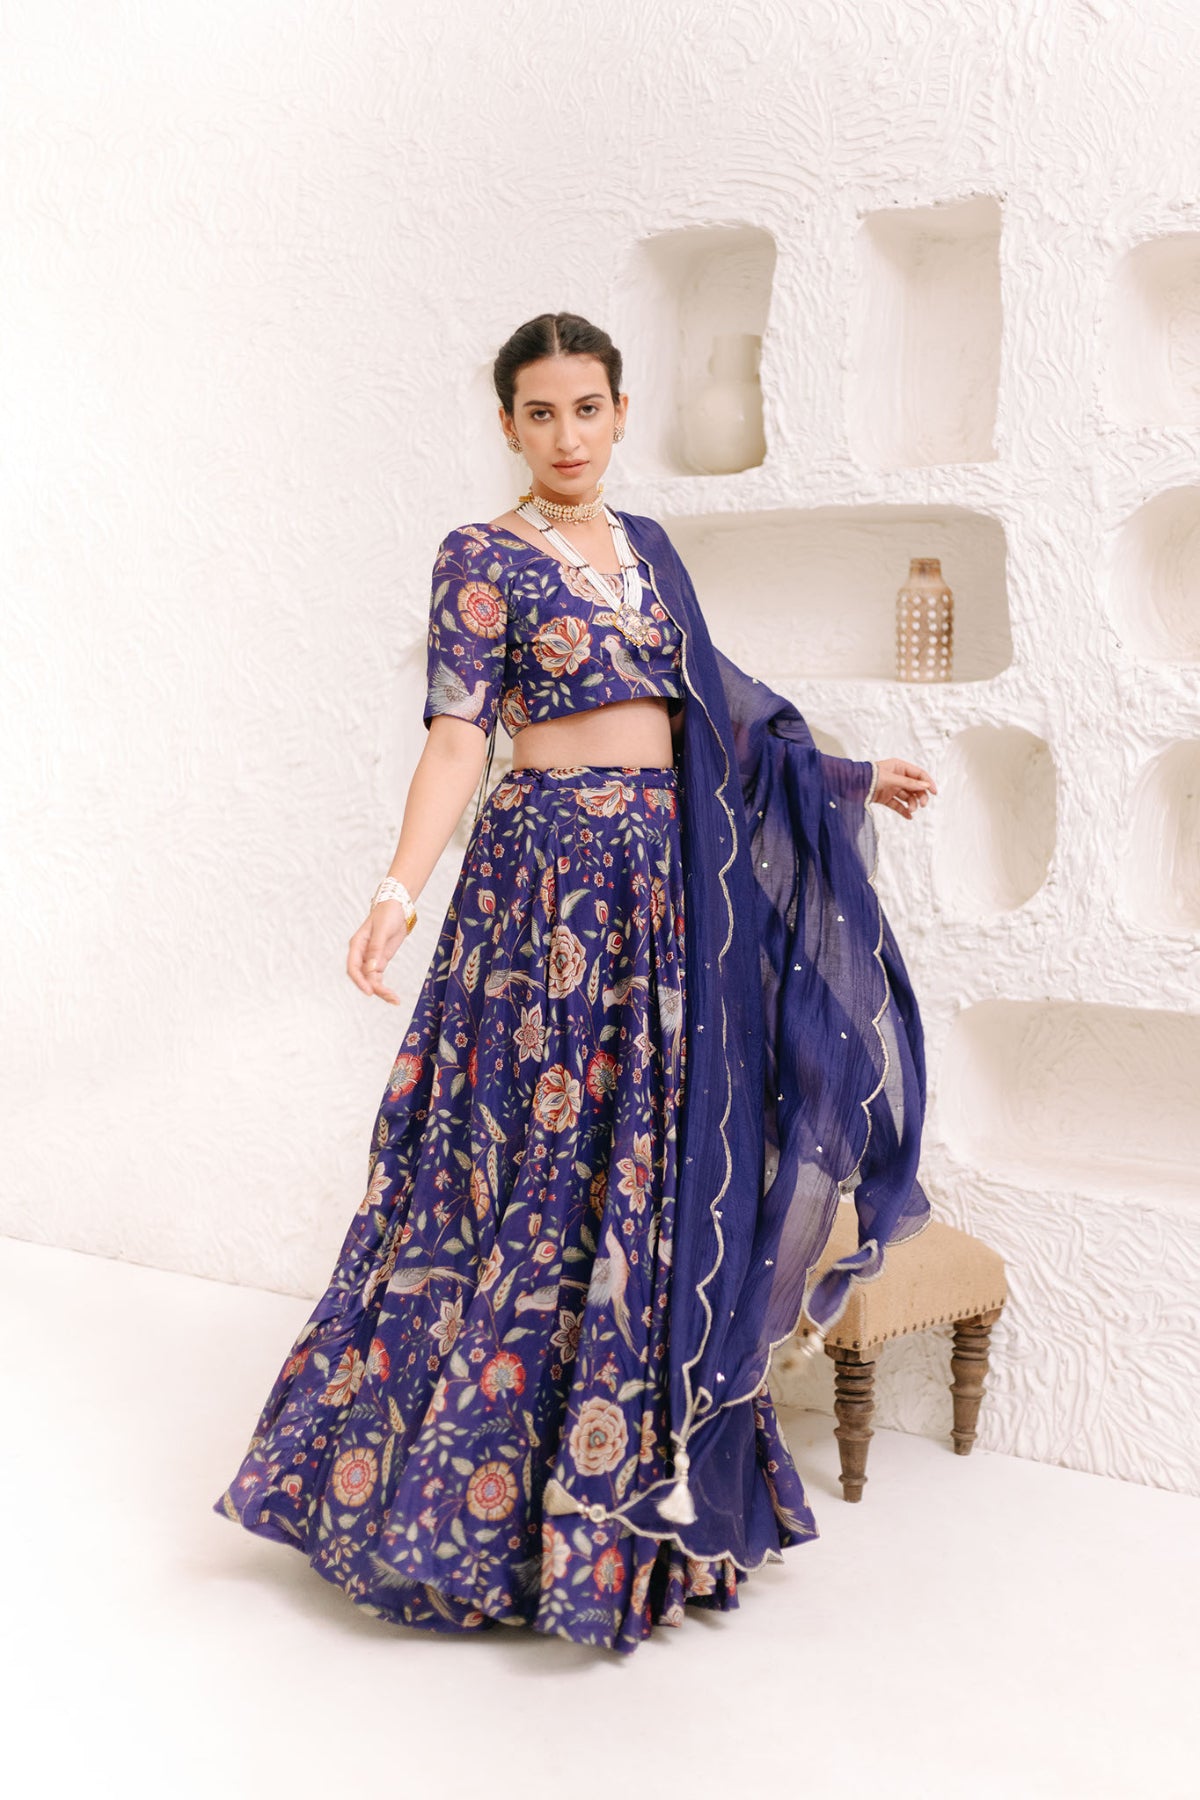 Moroccon Blue Floral print Lehenga with Floral print Blouse and Dupatta - set of 3